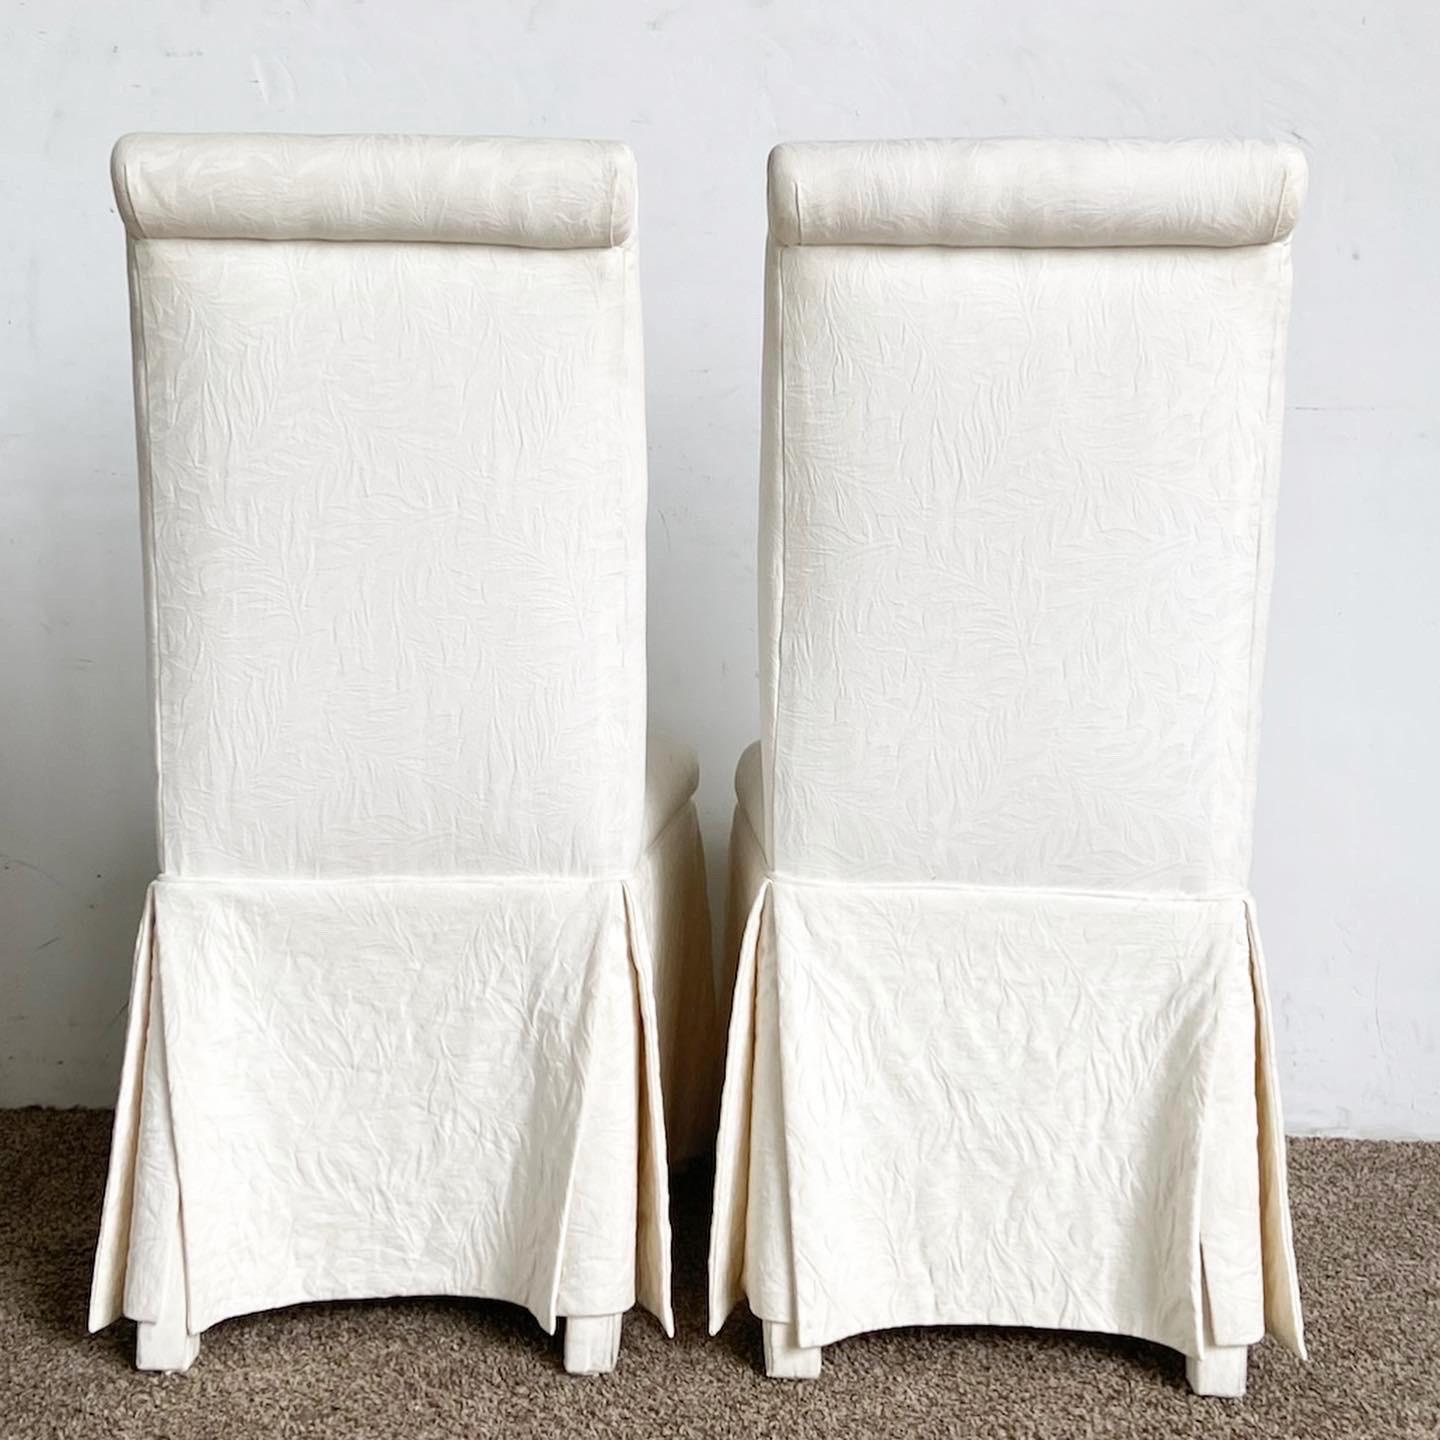 Regency Chic White Skirted Dining Chairs - Set of 6 In Good Condition For Sale In Delray Beach, FL